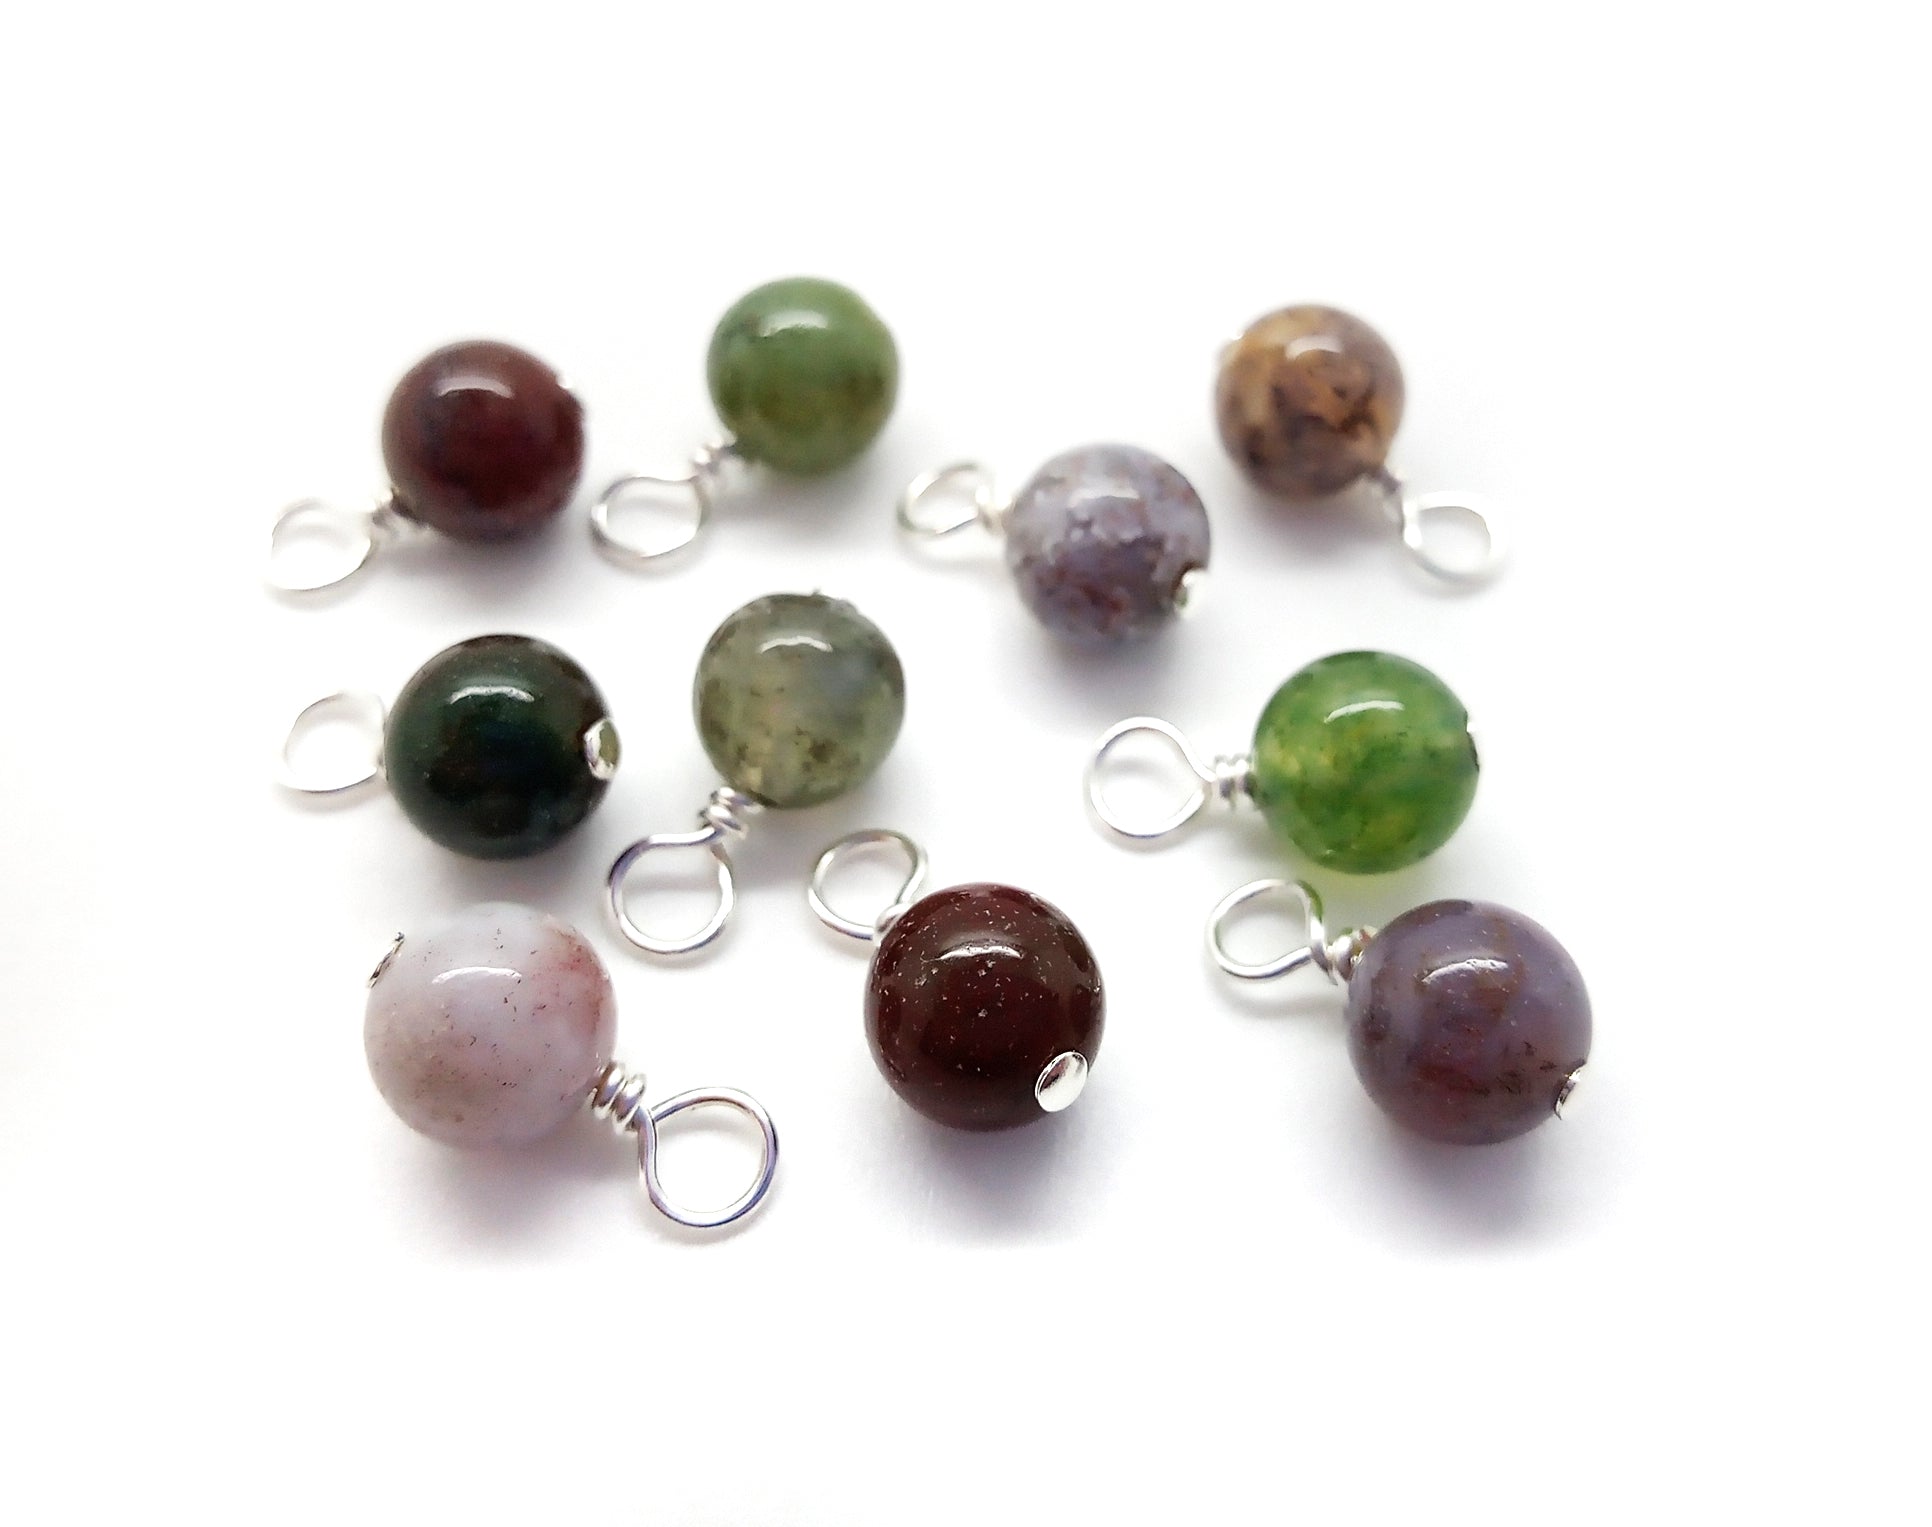 Indian Agate 6mm Bead Charms, Colorful Gemstone Dangles - Adorabilities Charms & Trinkets